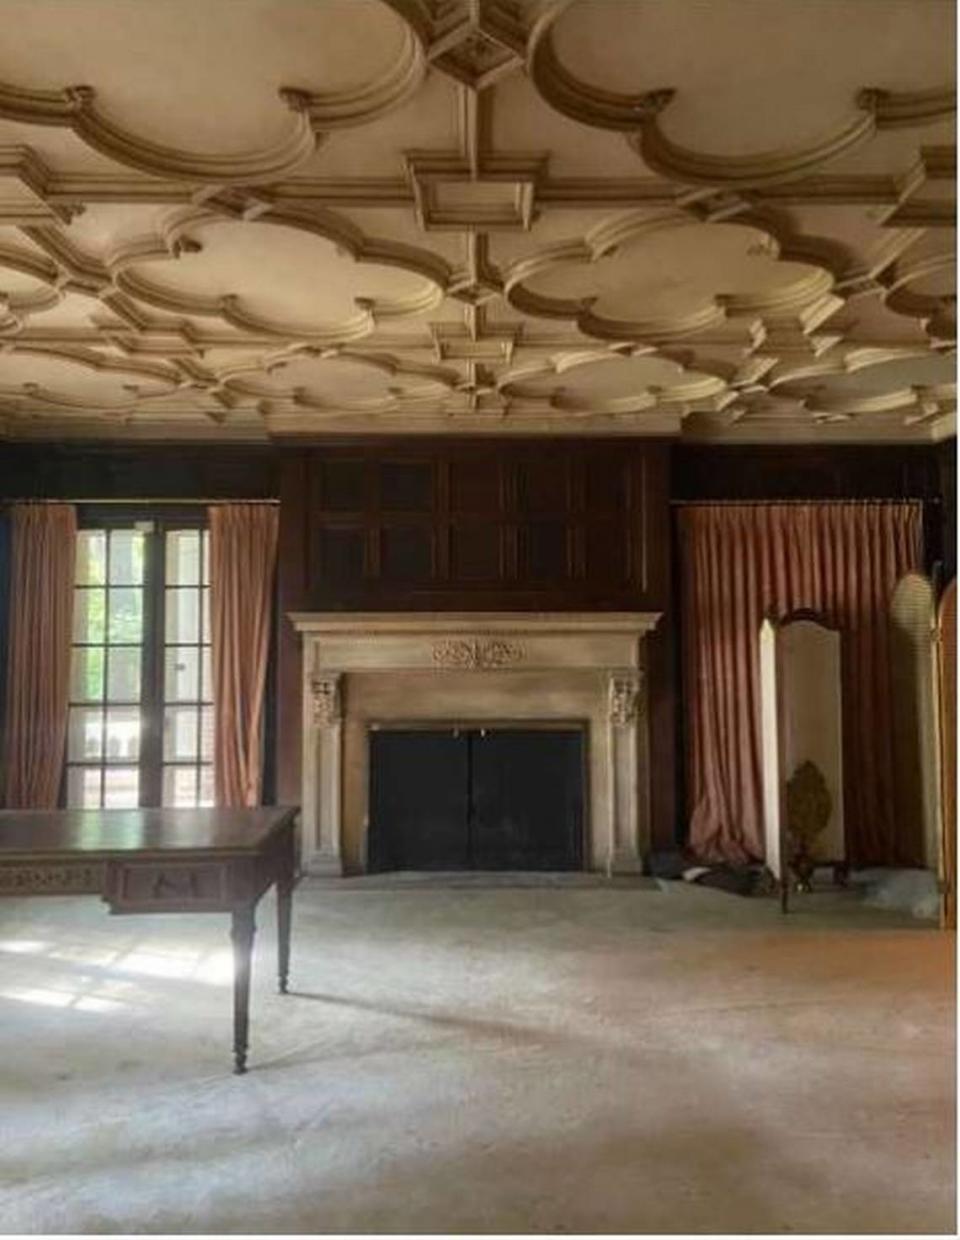 Ornamental plaster ceilings in the home at 4526 Warwick Blvd. across from Southmoreland Park.